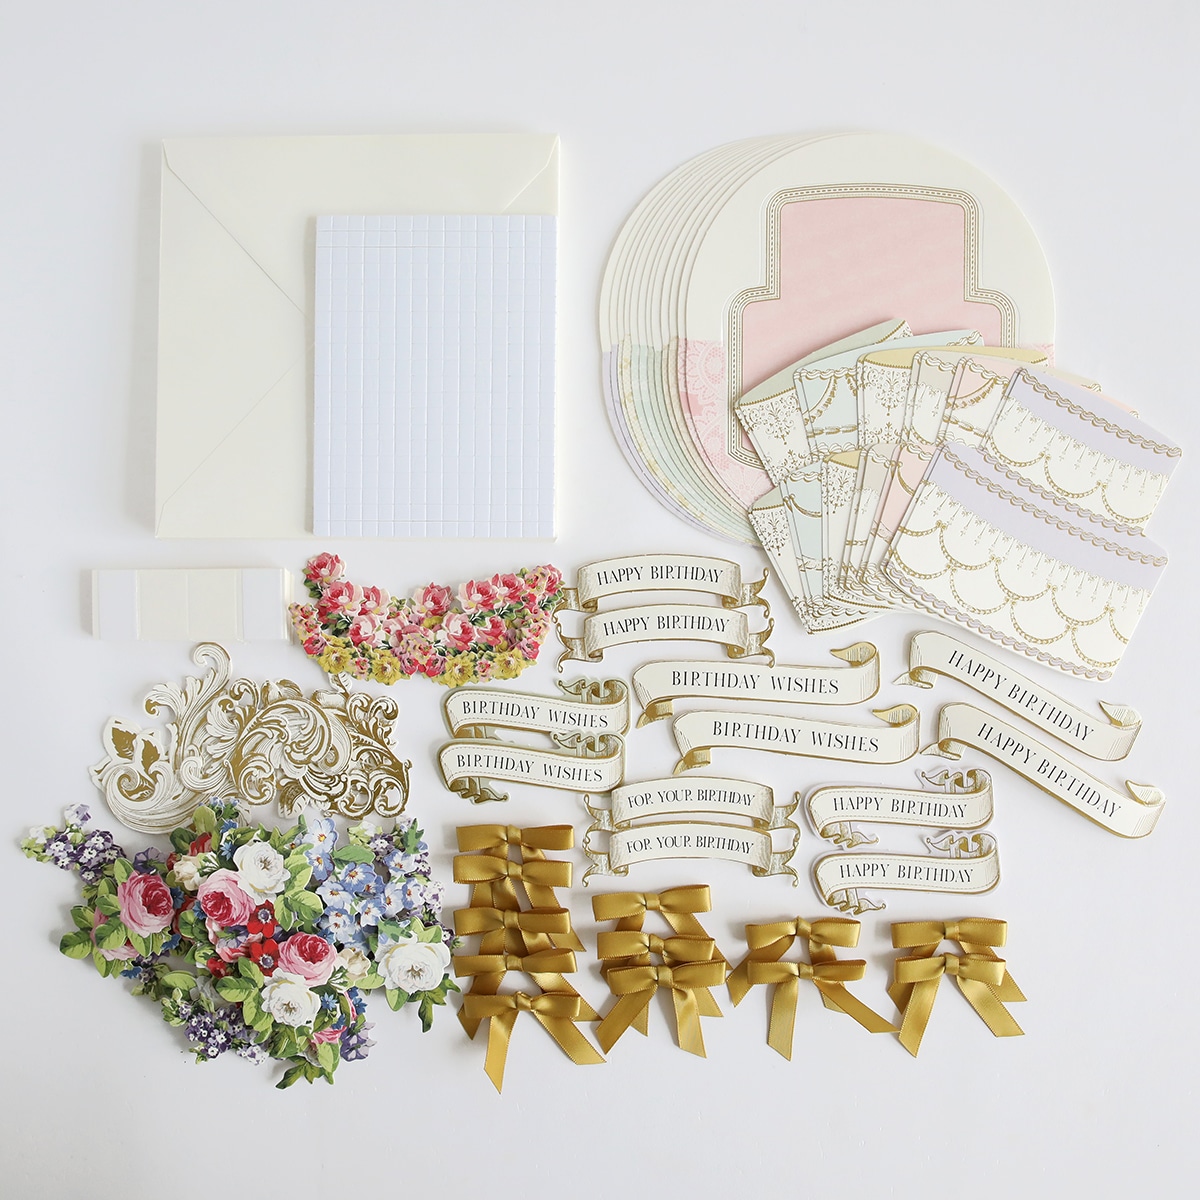 A collection of papers, ribbons, and other items are laid out on a white surface.